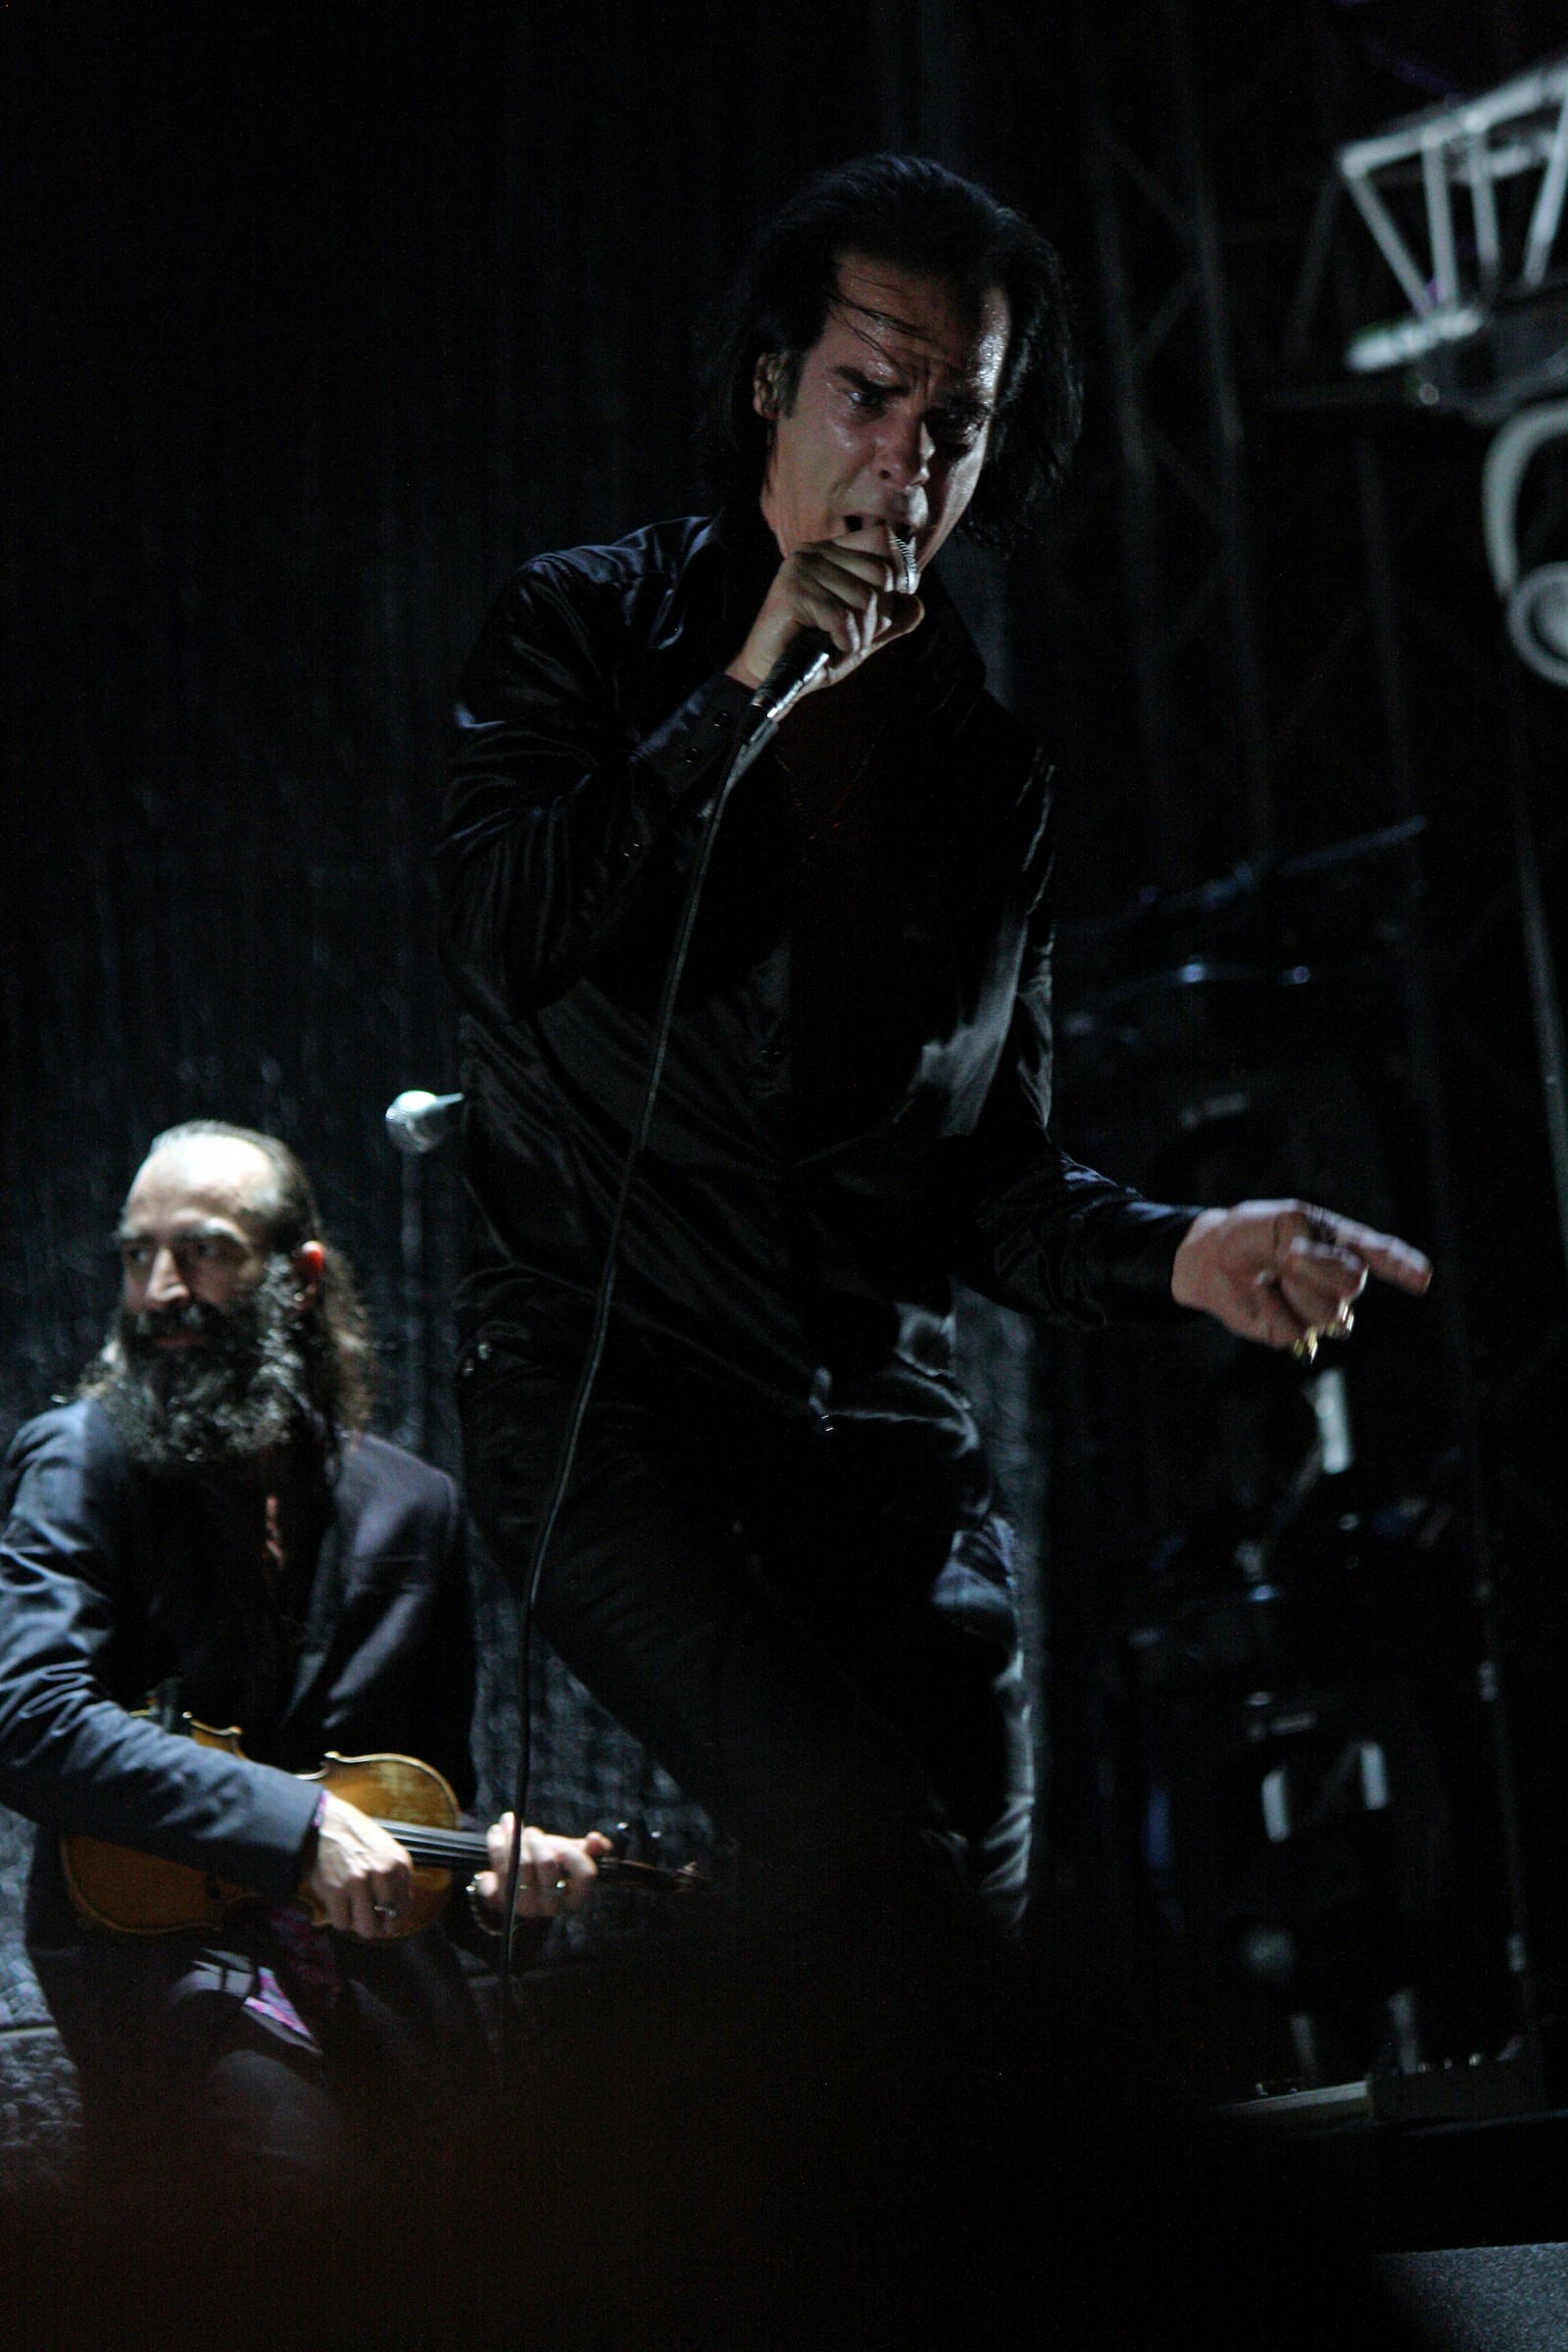 Nick Cave, Lucca 2013 # 3...